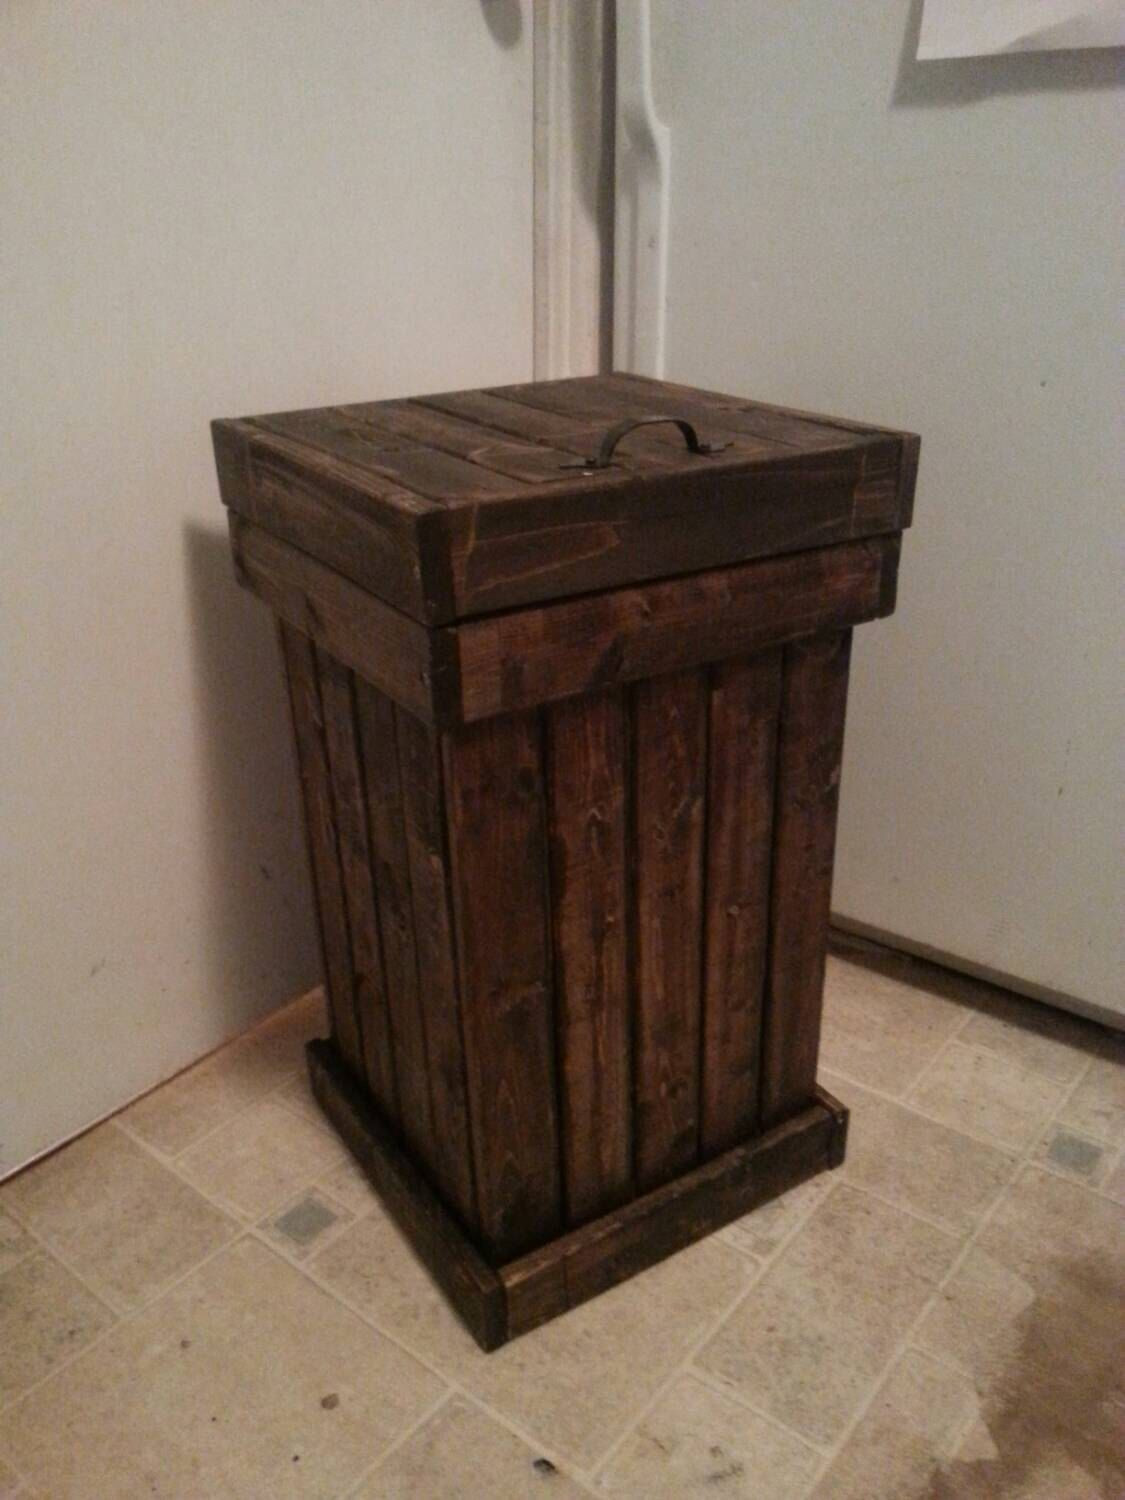 DIY Wooden Trash Can
 Pin by Tanya Atlasman on Etsy in 2019